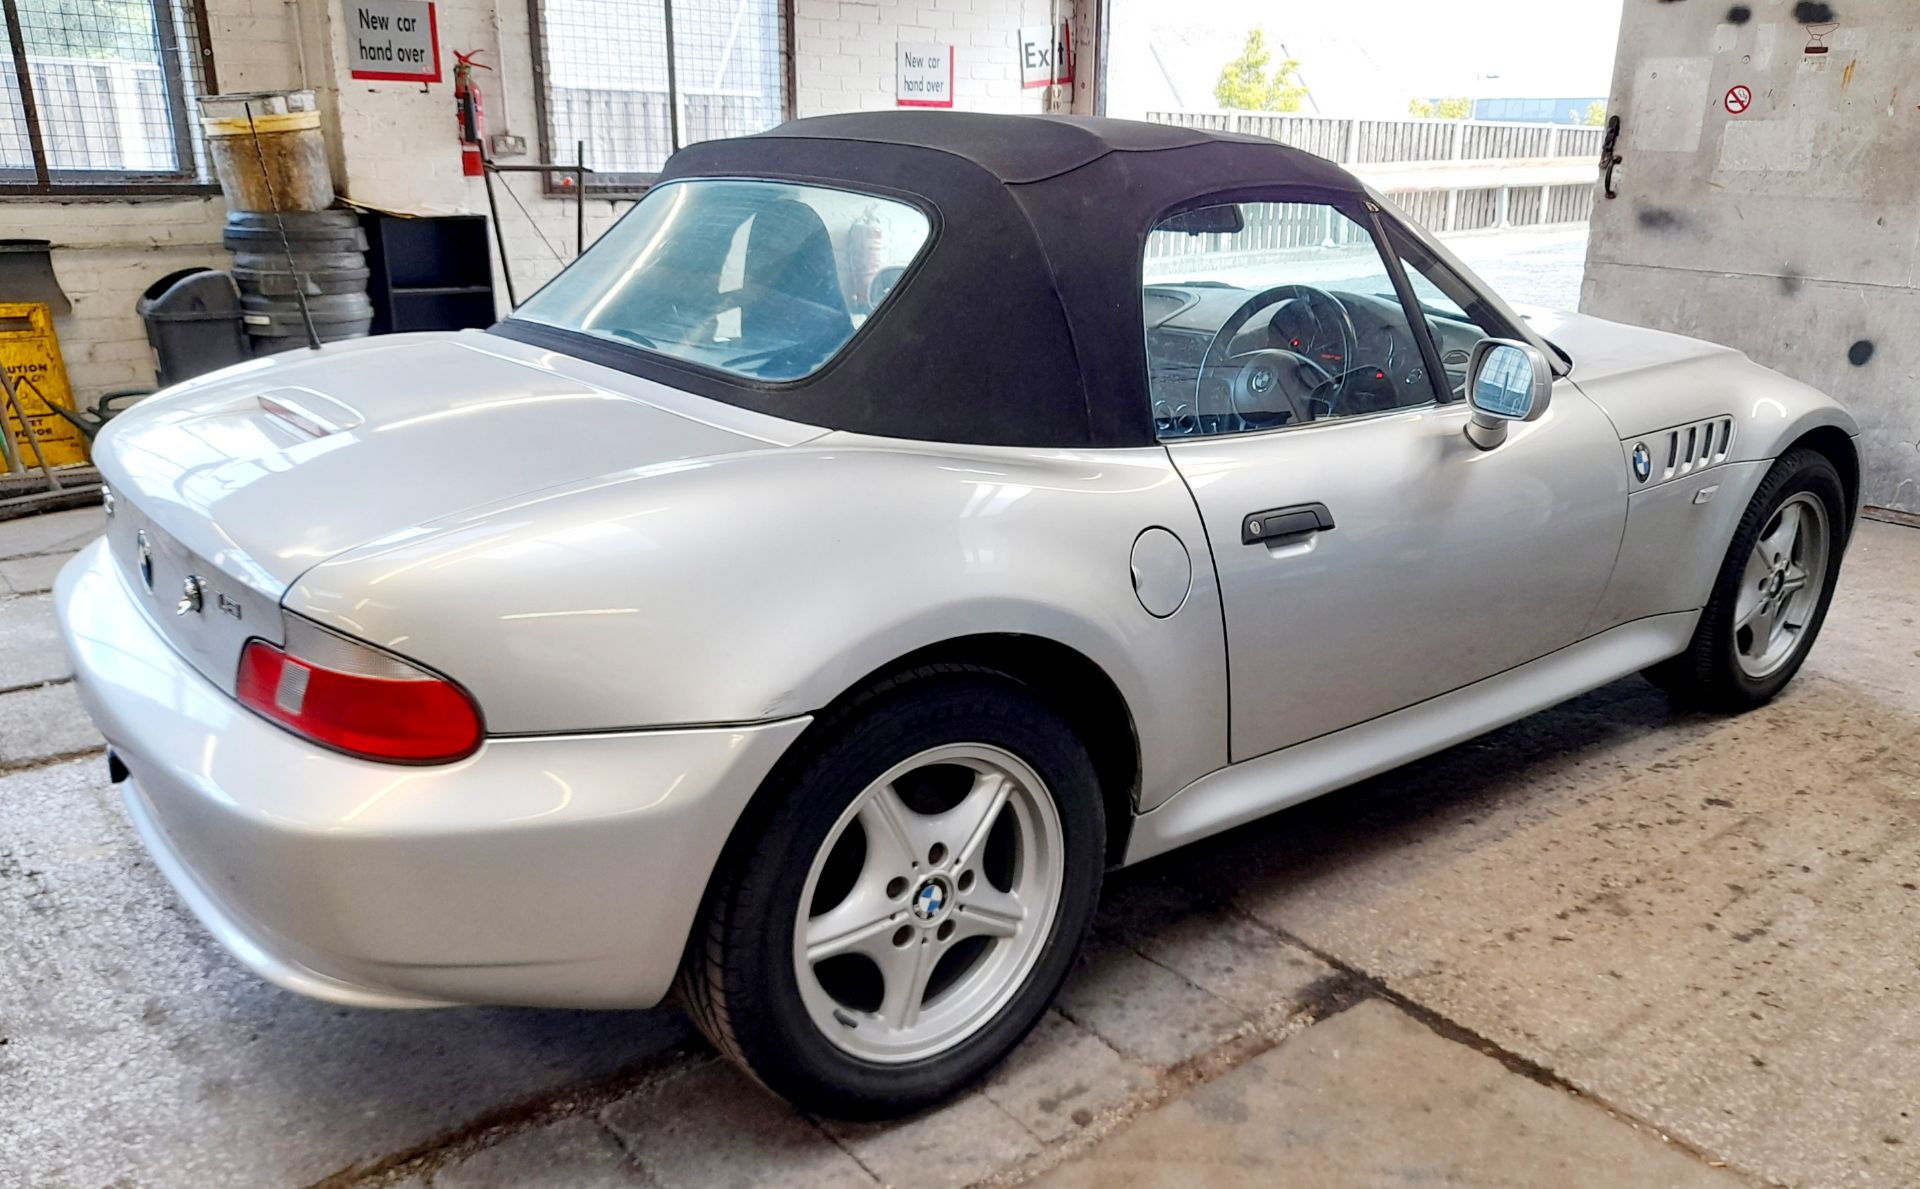 BMW Z3 Convertible 1895cc, Petrol, Manual, Silver, 29.09.2000, Registration X929 AFP, 69,586 - Image 4 of 17